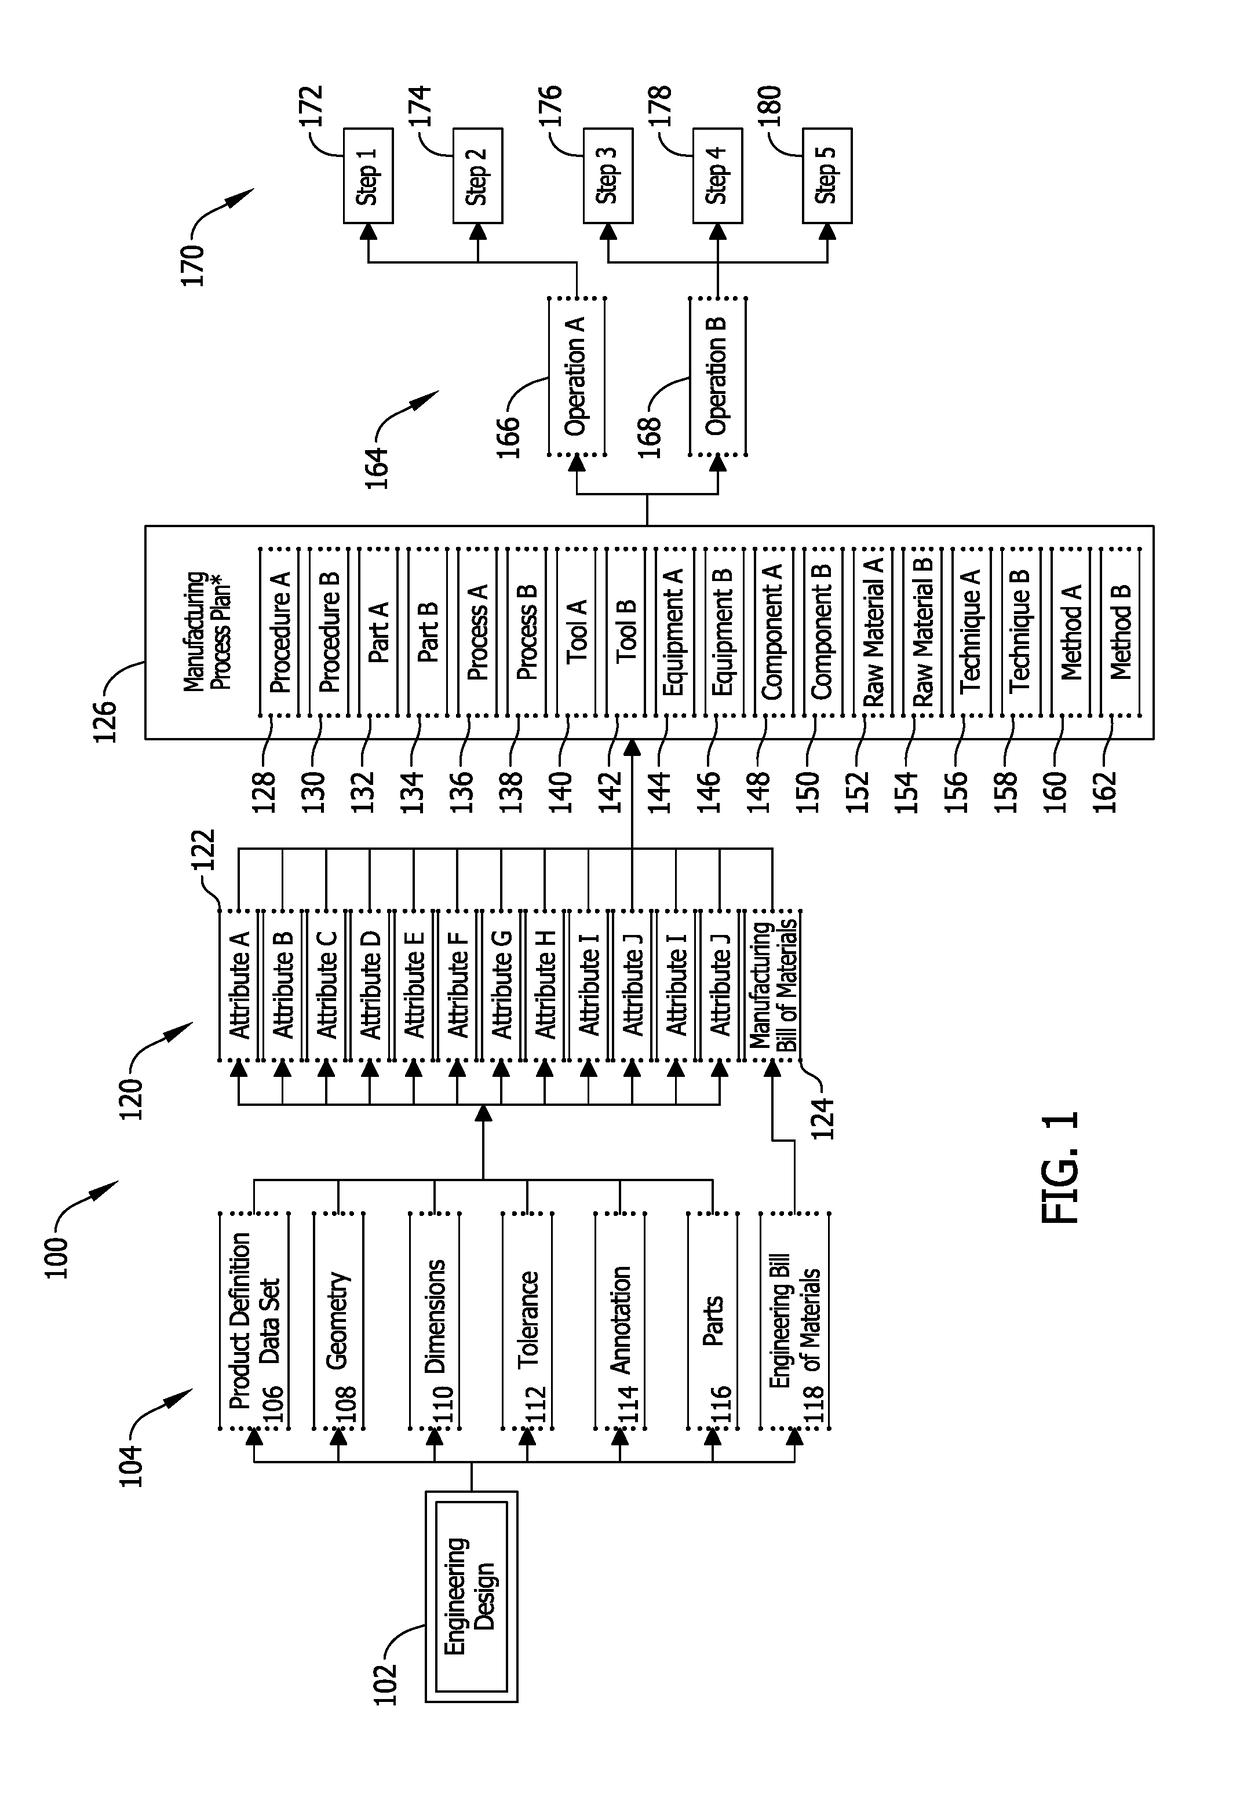 System and methods for managing changes to a product in a manufacturing environment including conversion of an engineering bill of material to a manufacturing bill of material